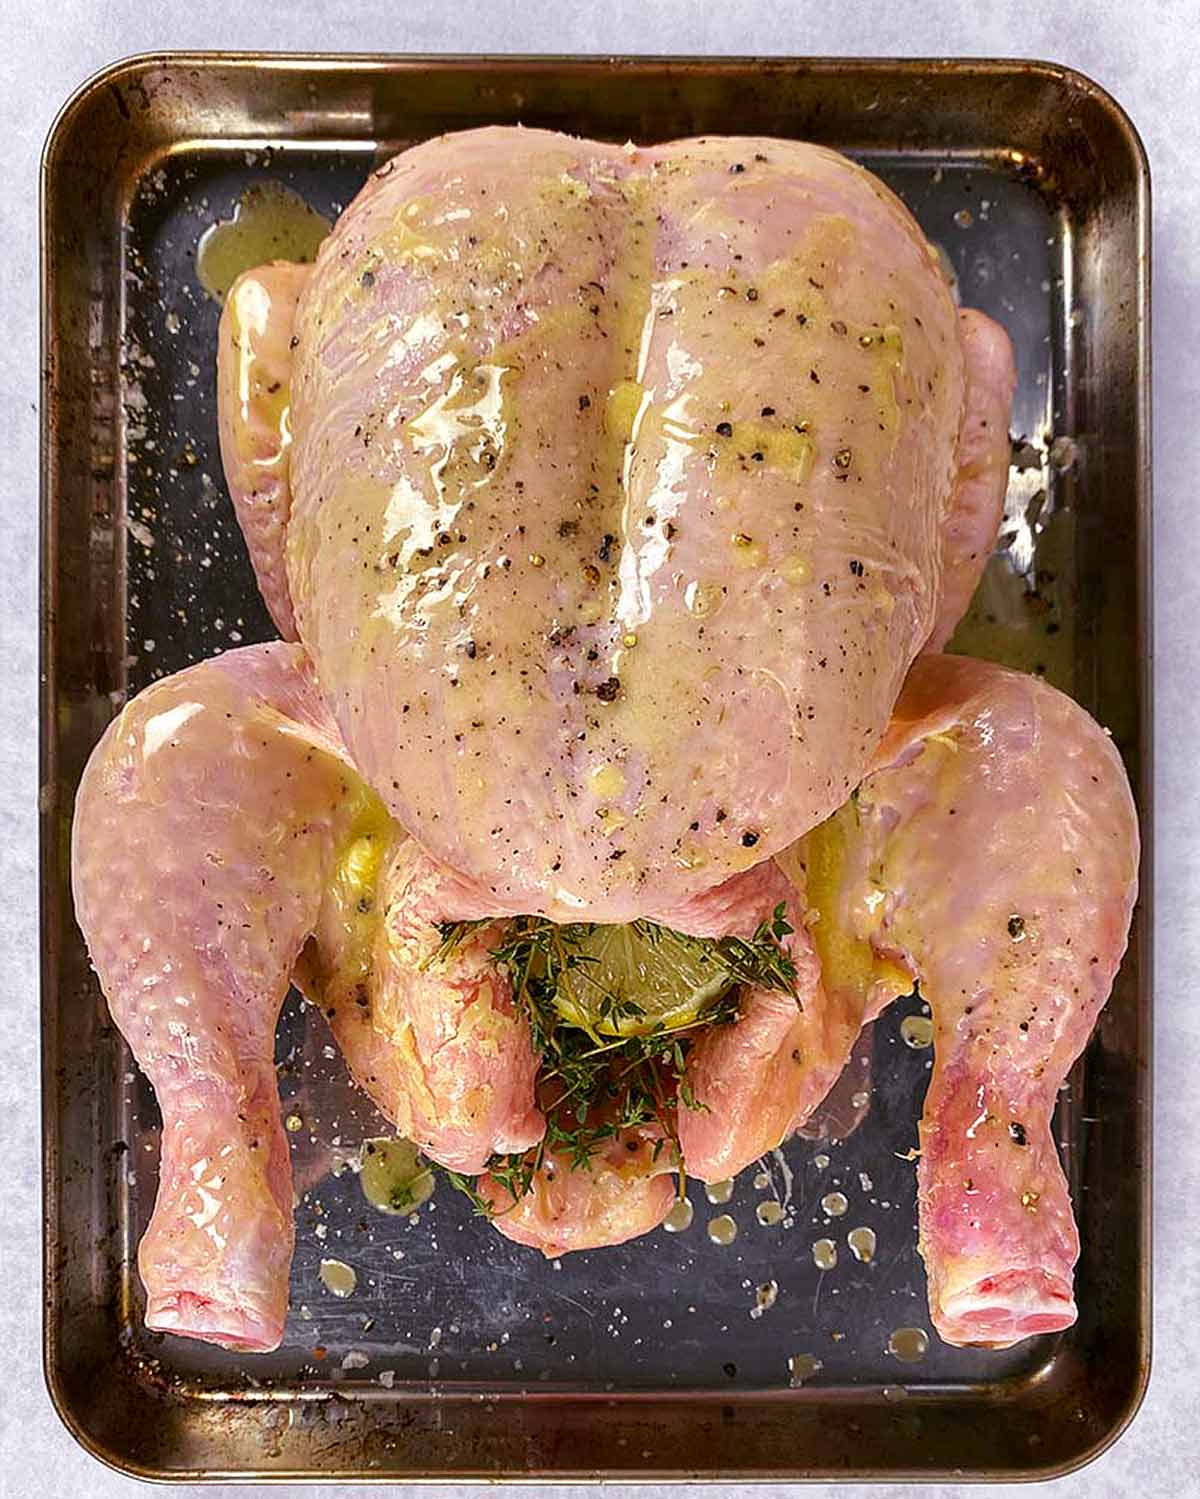 A whole uncooked chicken on a baking tray with lemons and thyme in its cavity.